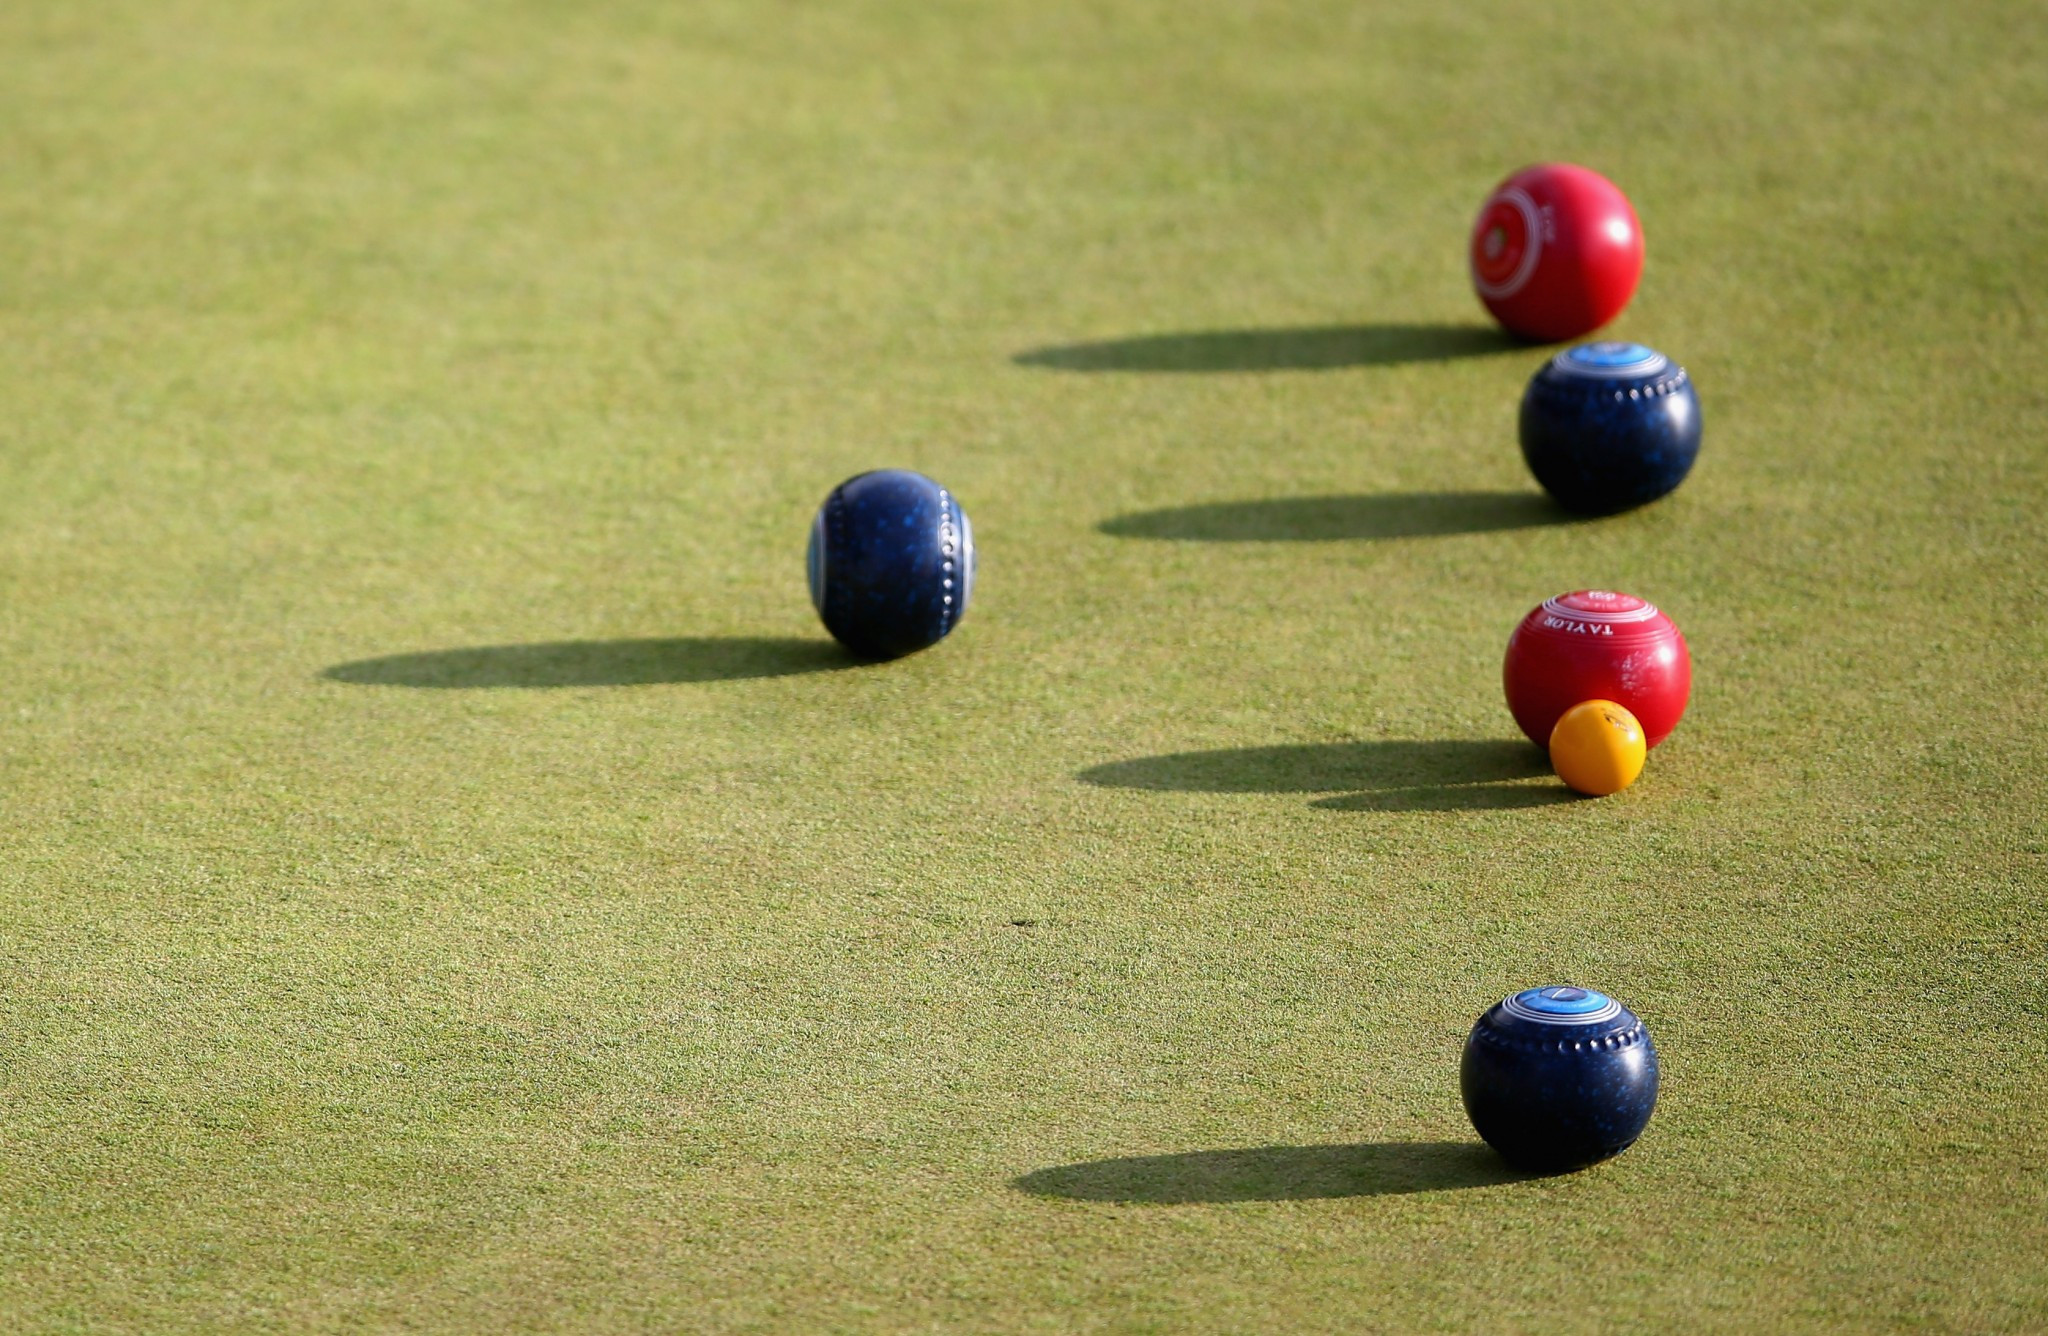 The event is one of the most prestigious on the lawn bowls calendar ©Getty Images